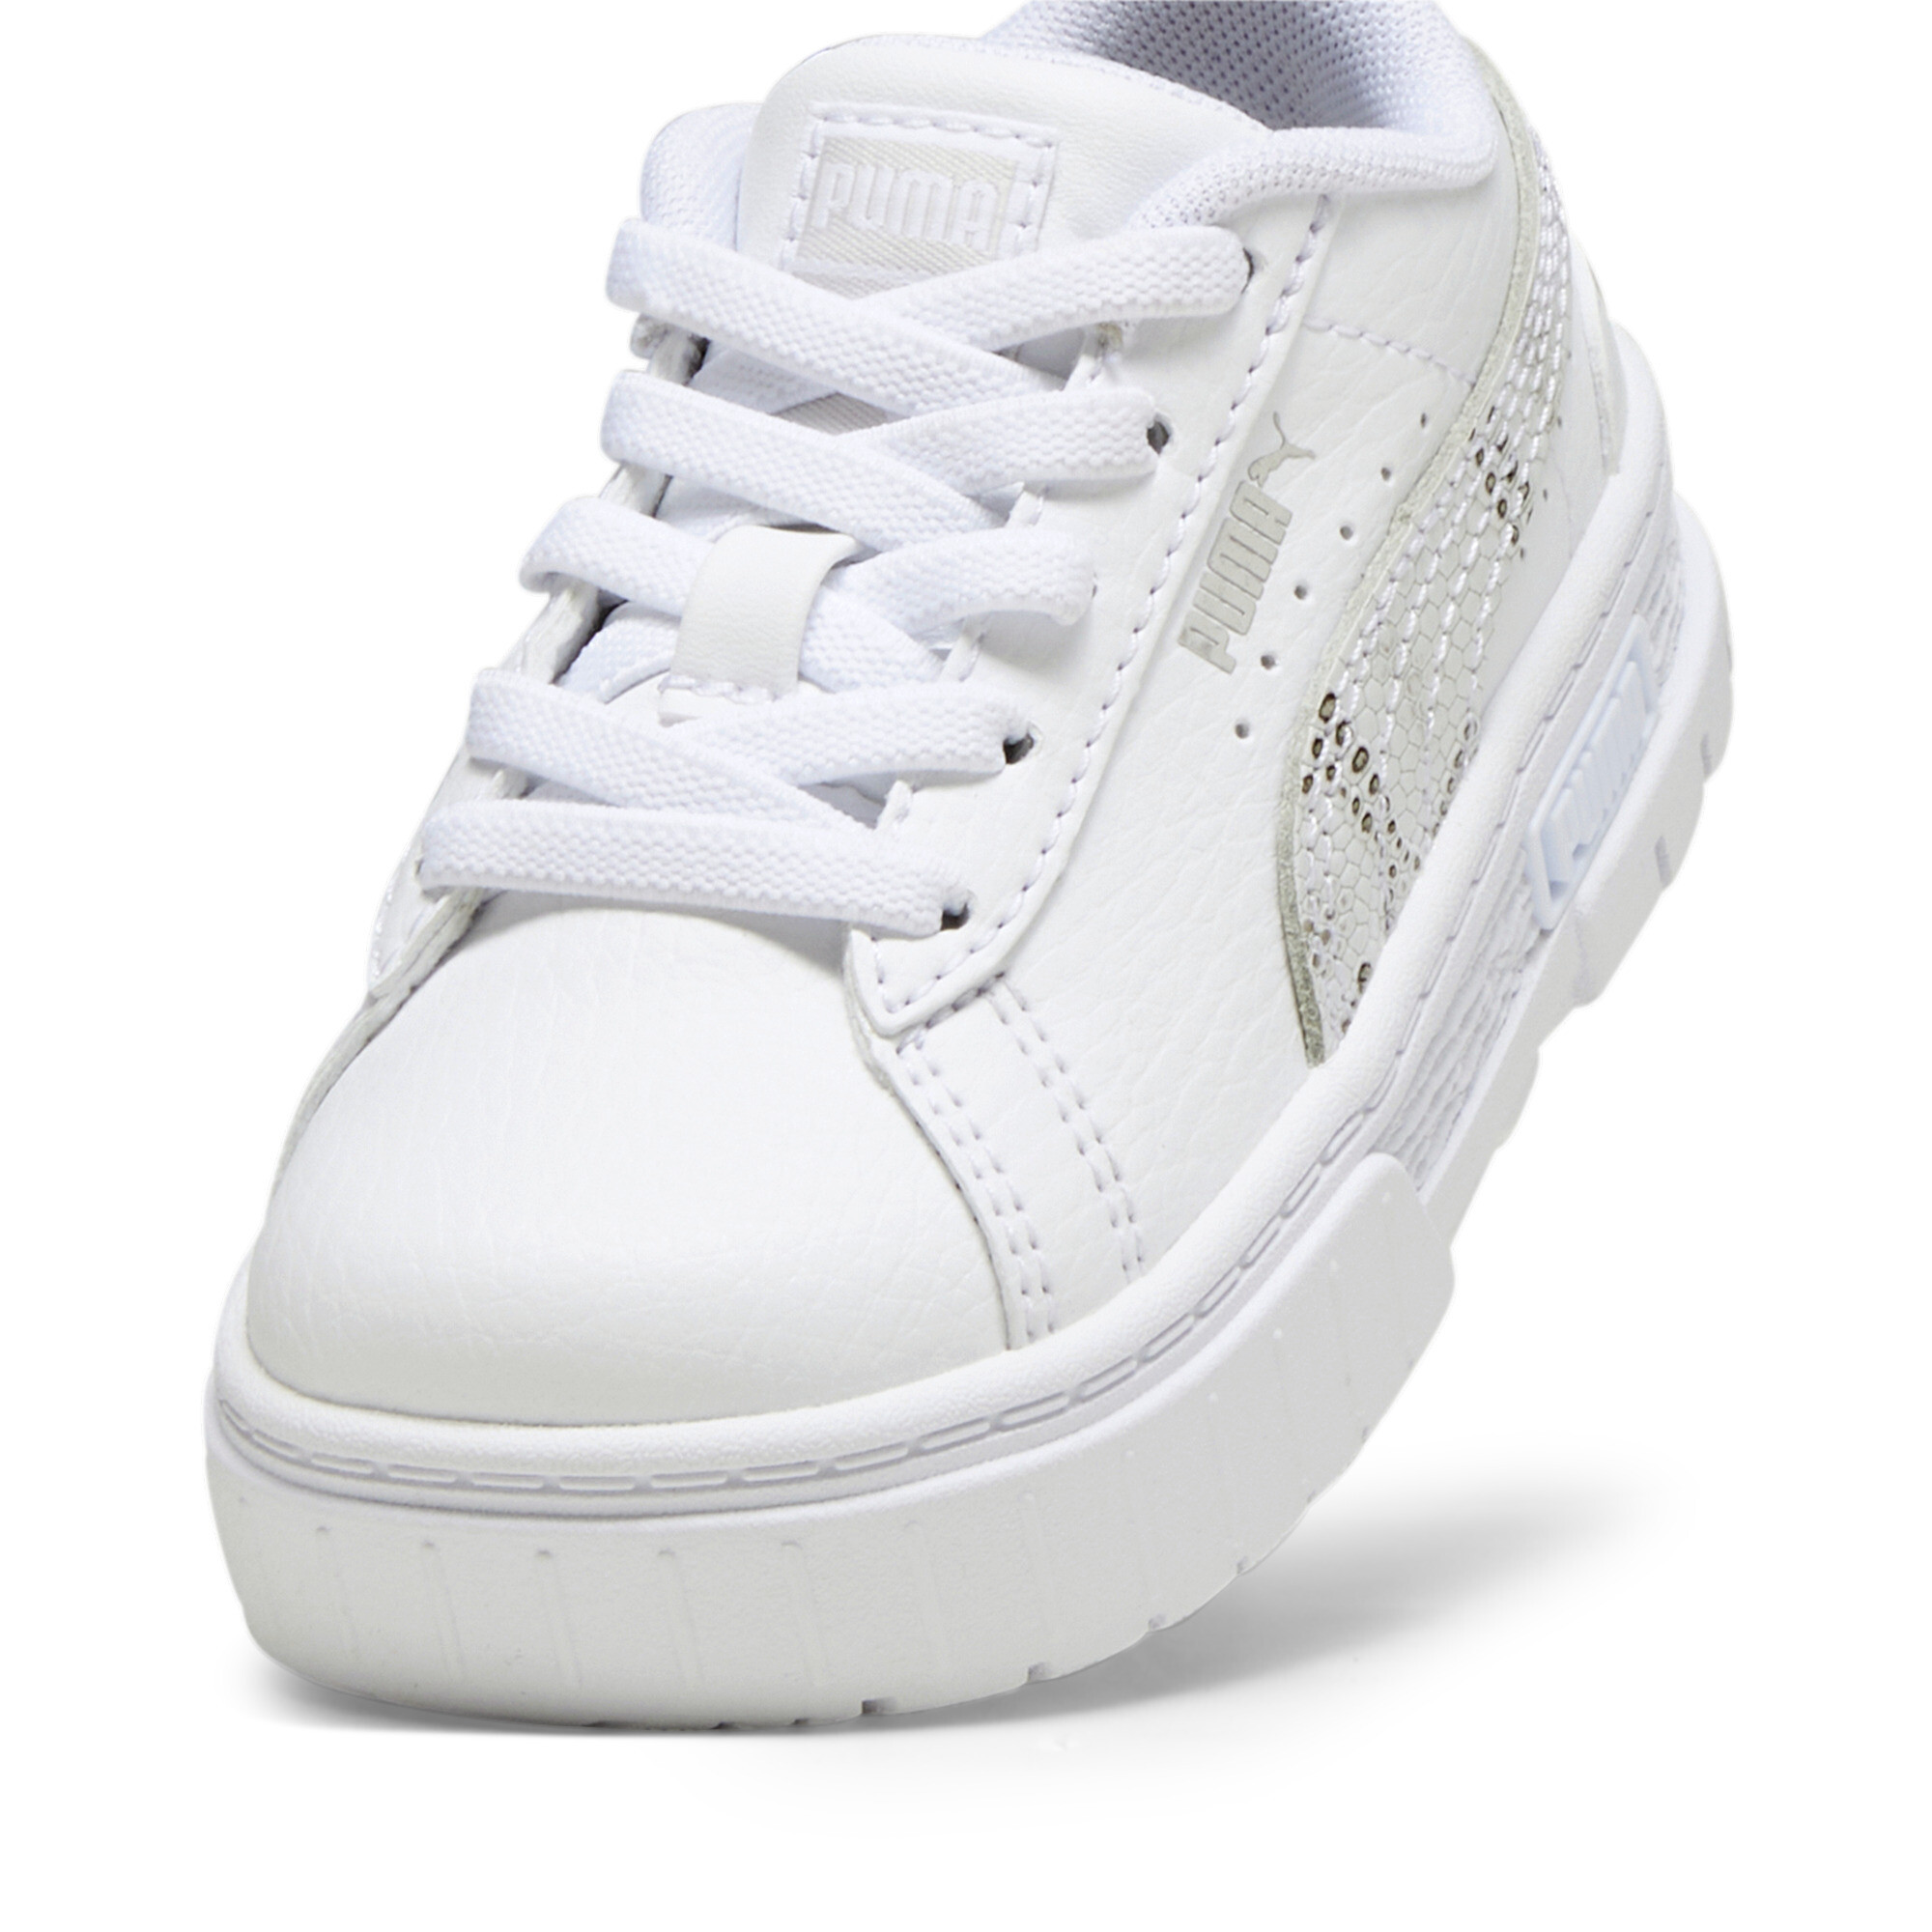 Women's Puma Mayze Snake Toddlers' Sneakers, White, Size 19, Shoes